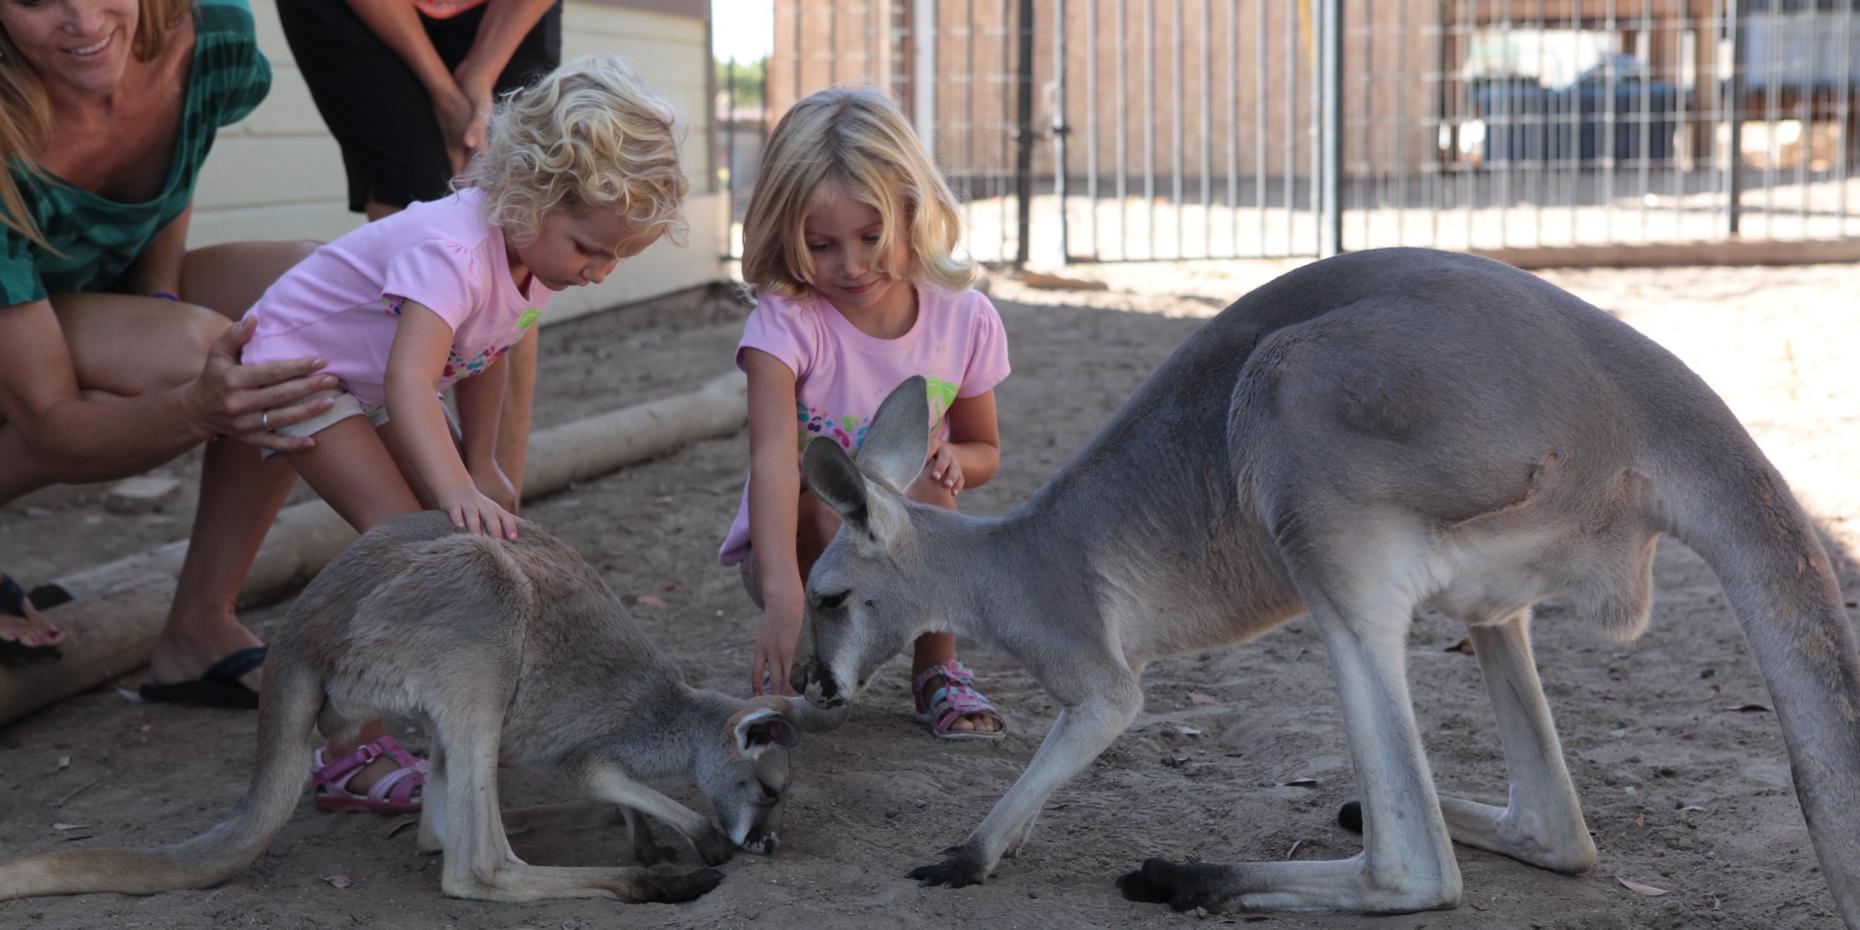 Up-Close Animal Encounter with Kangaroos in Paso Robles